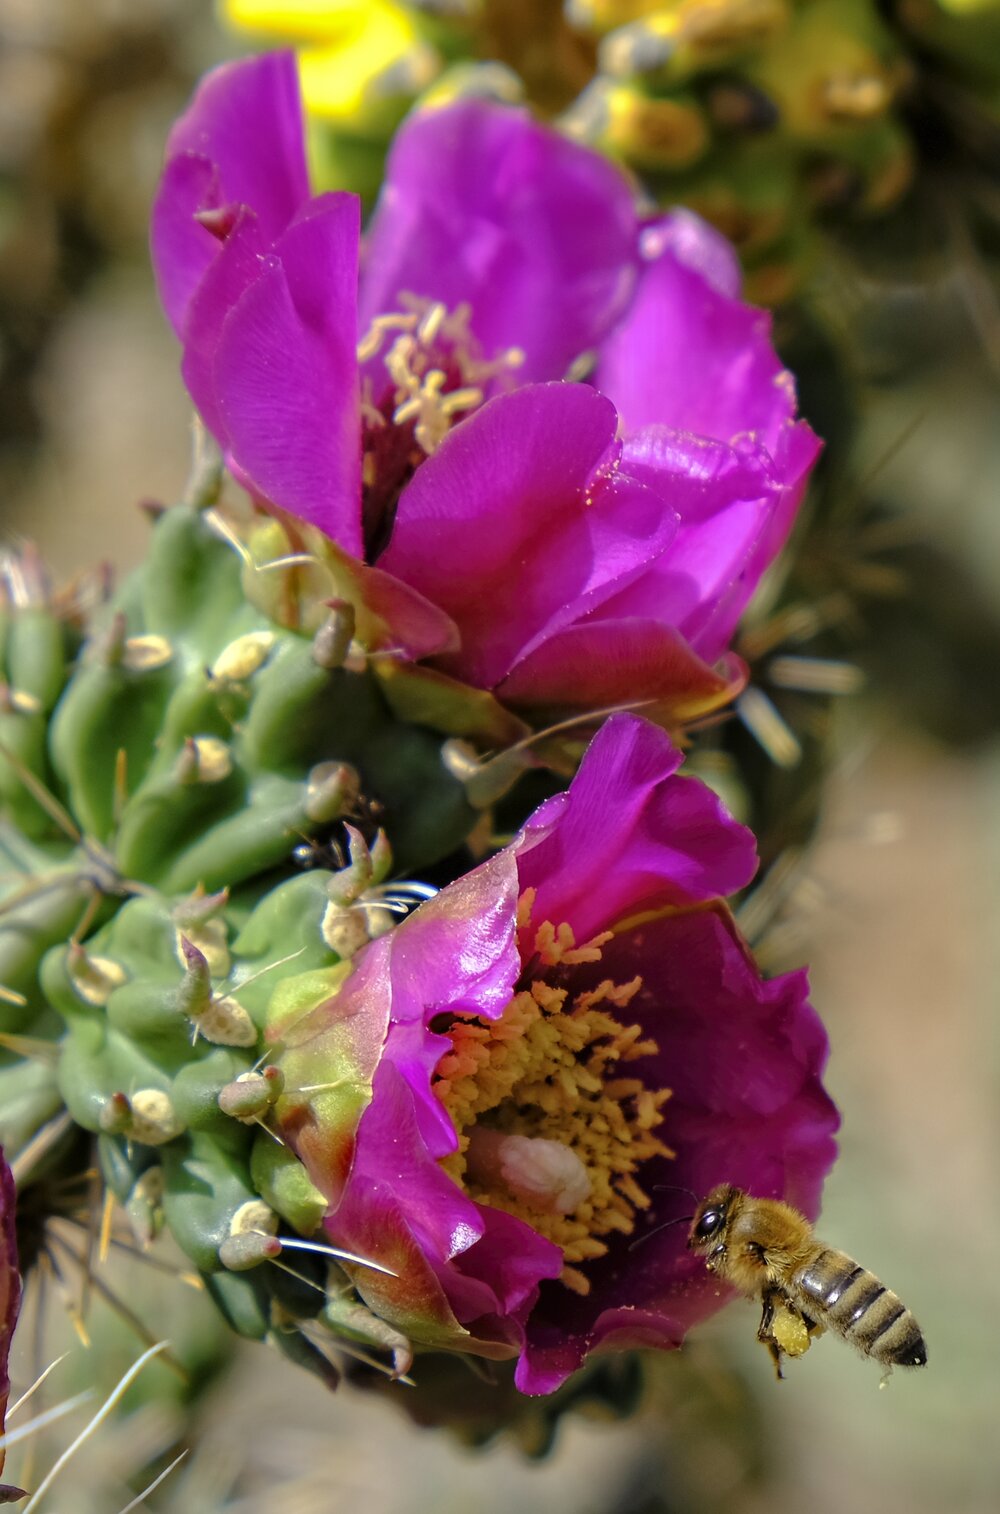 Cane Cholla Cactus Flower and Honey Bee